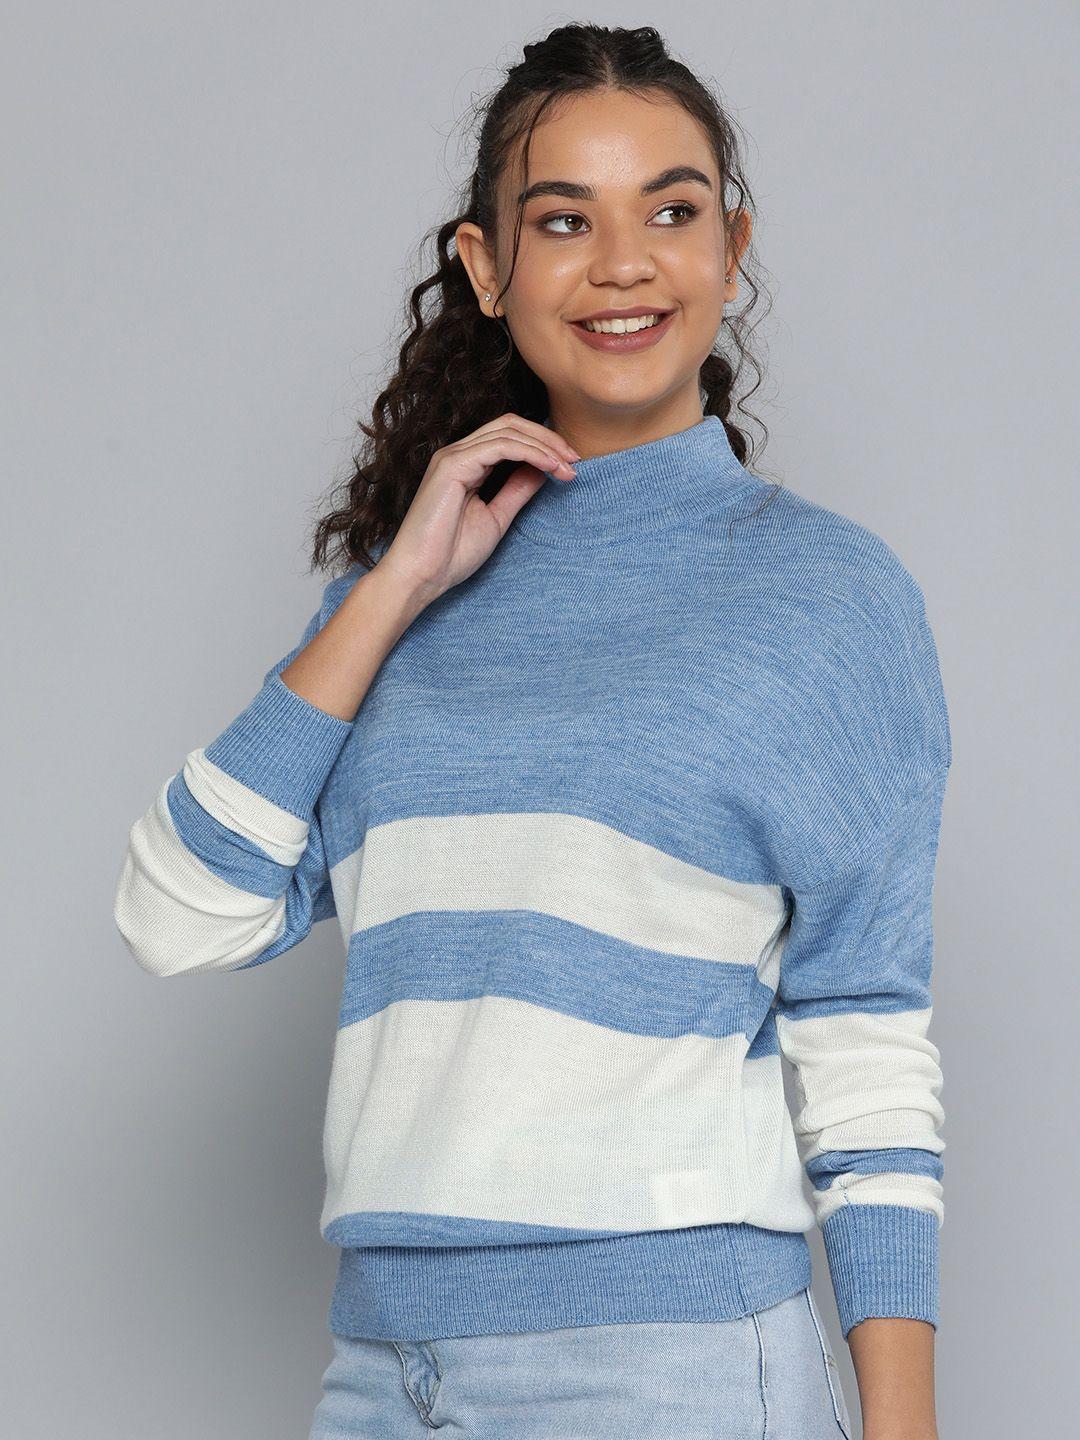 here&now women blue & white striped sweater vest